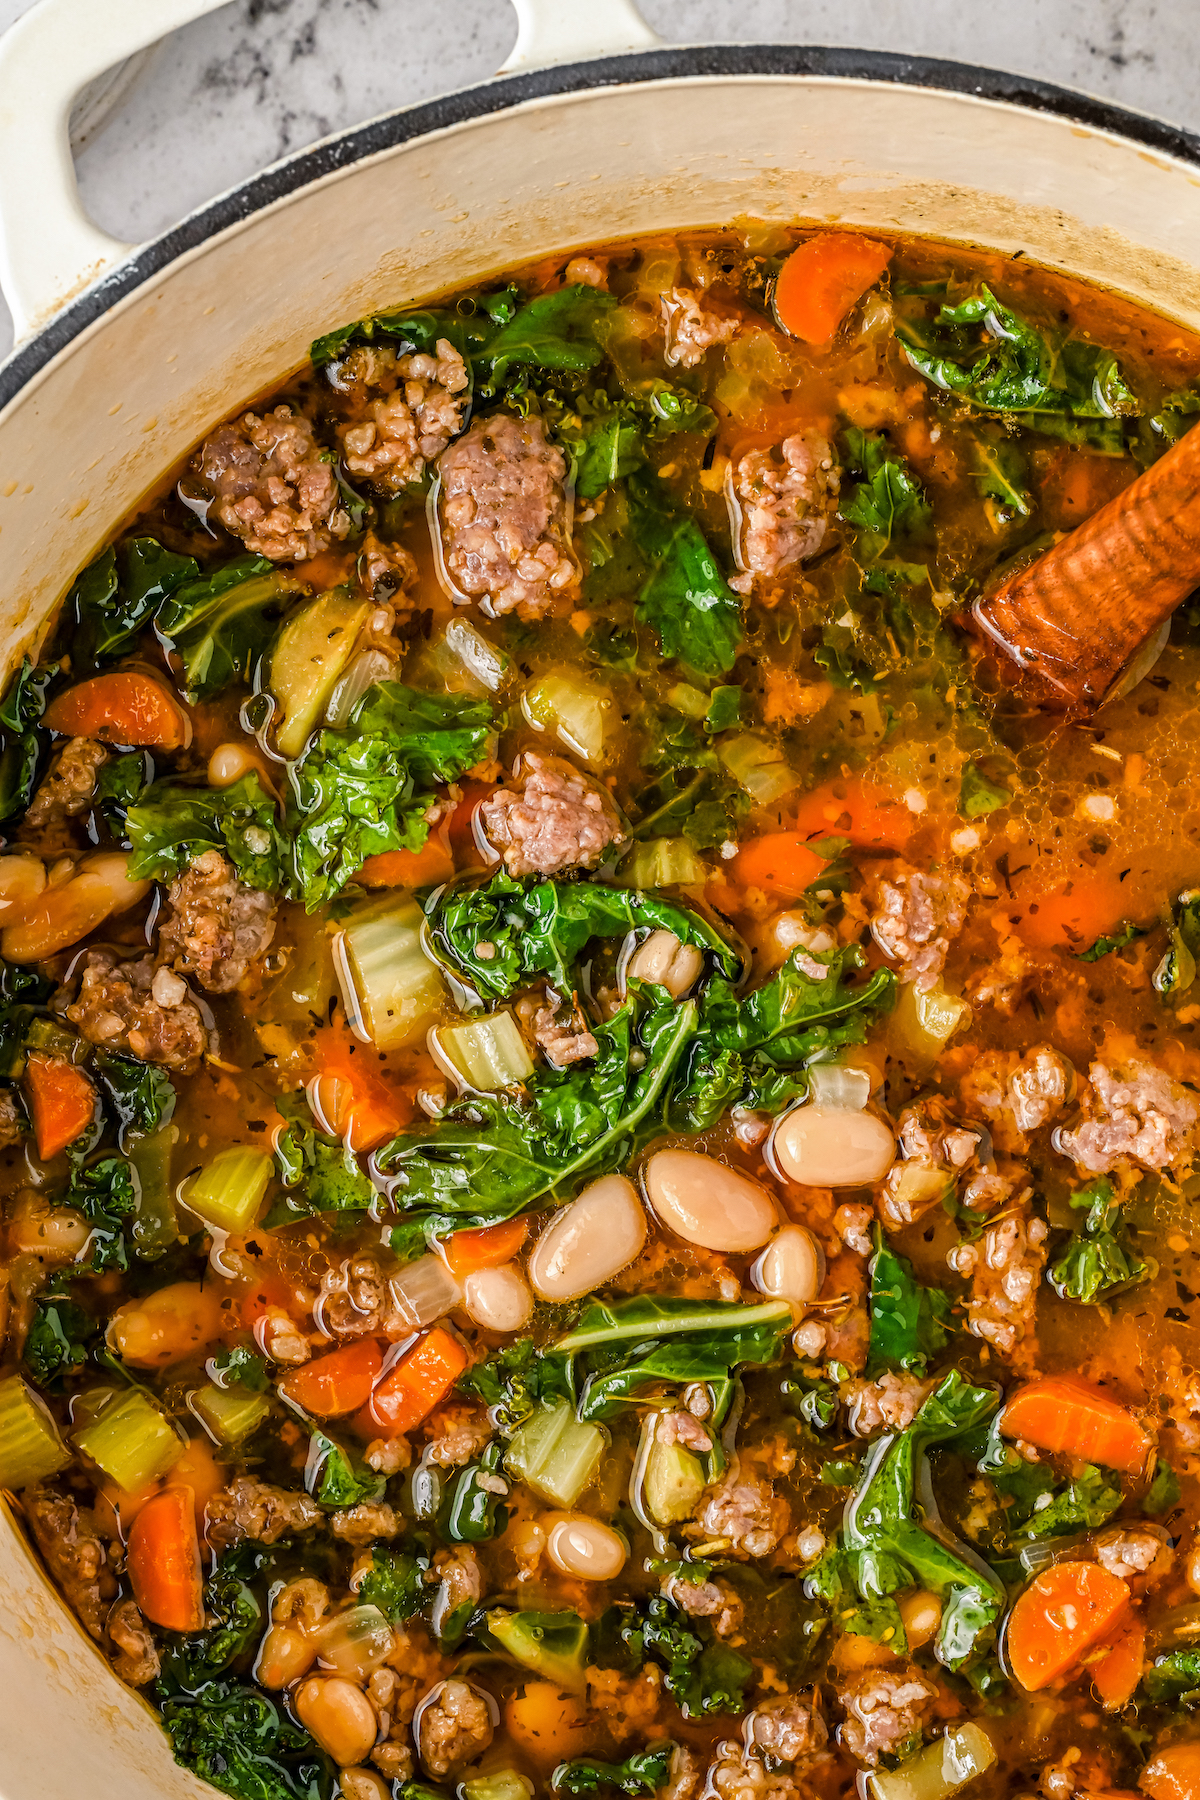 A pot of soup with kale, sausage, and white beans.